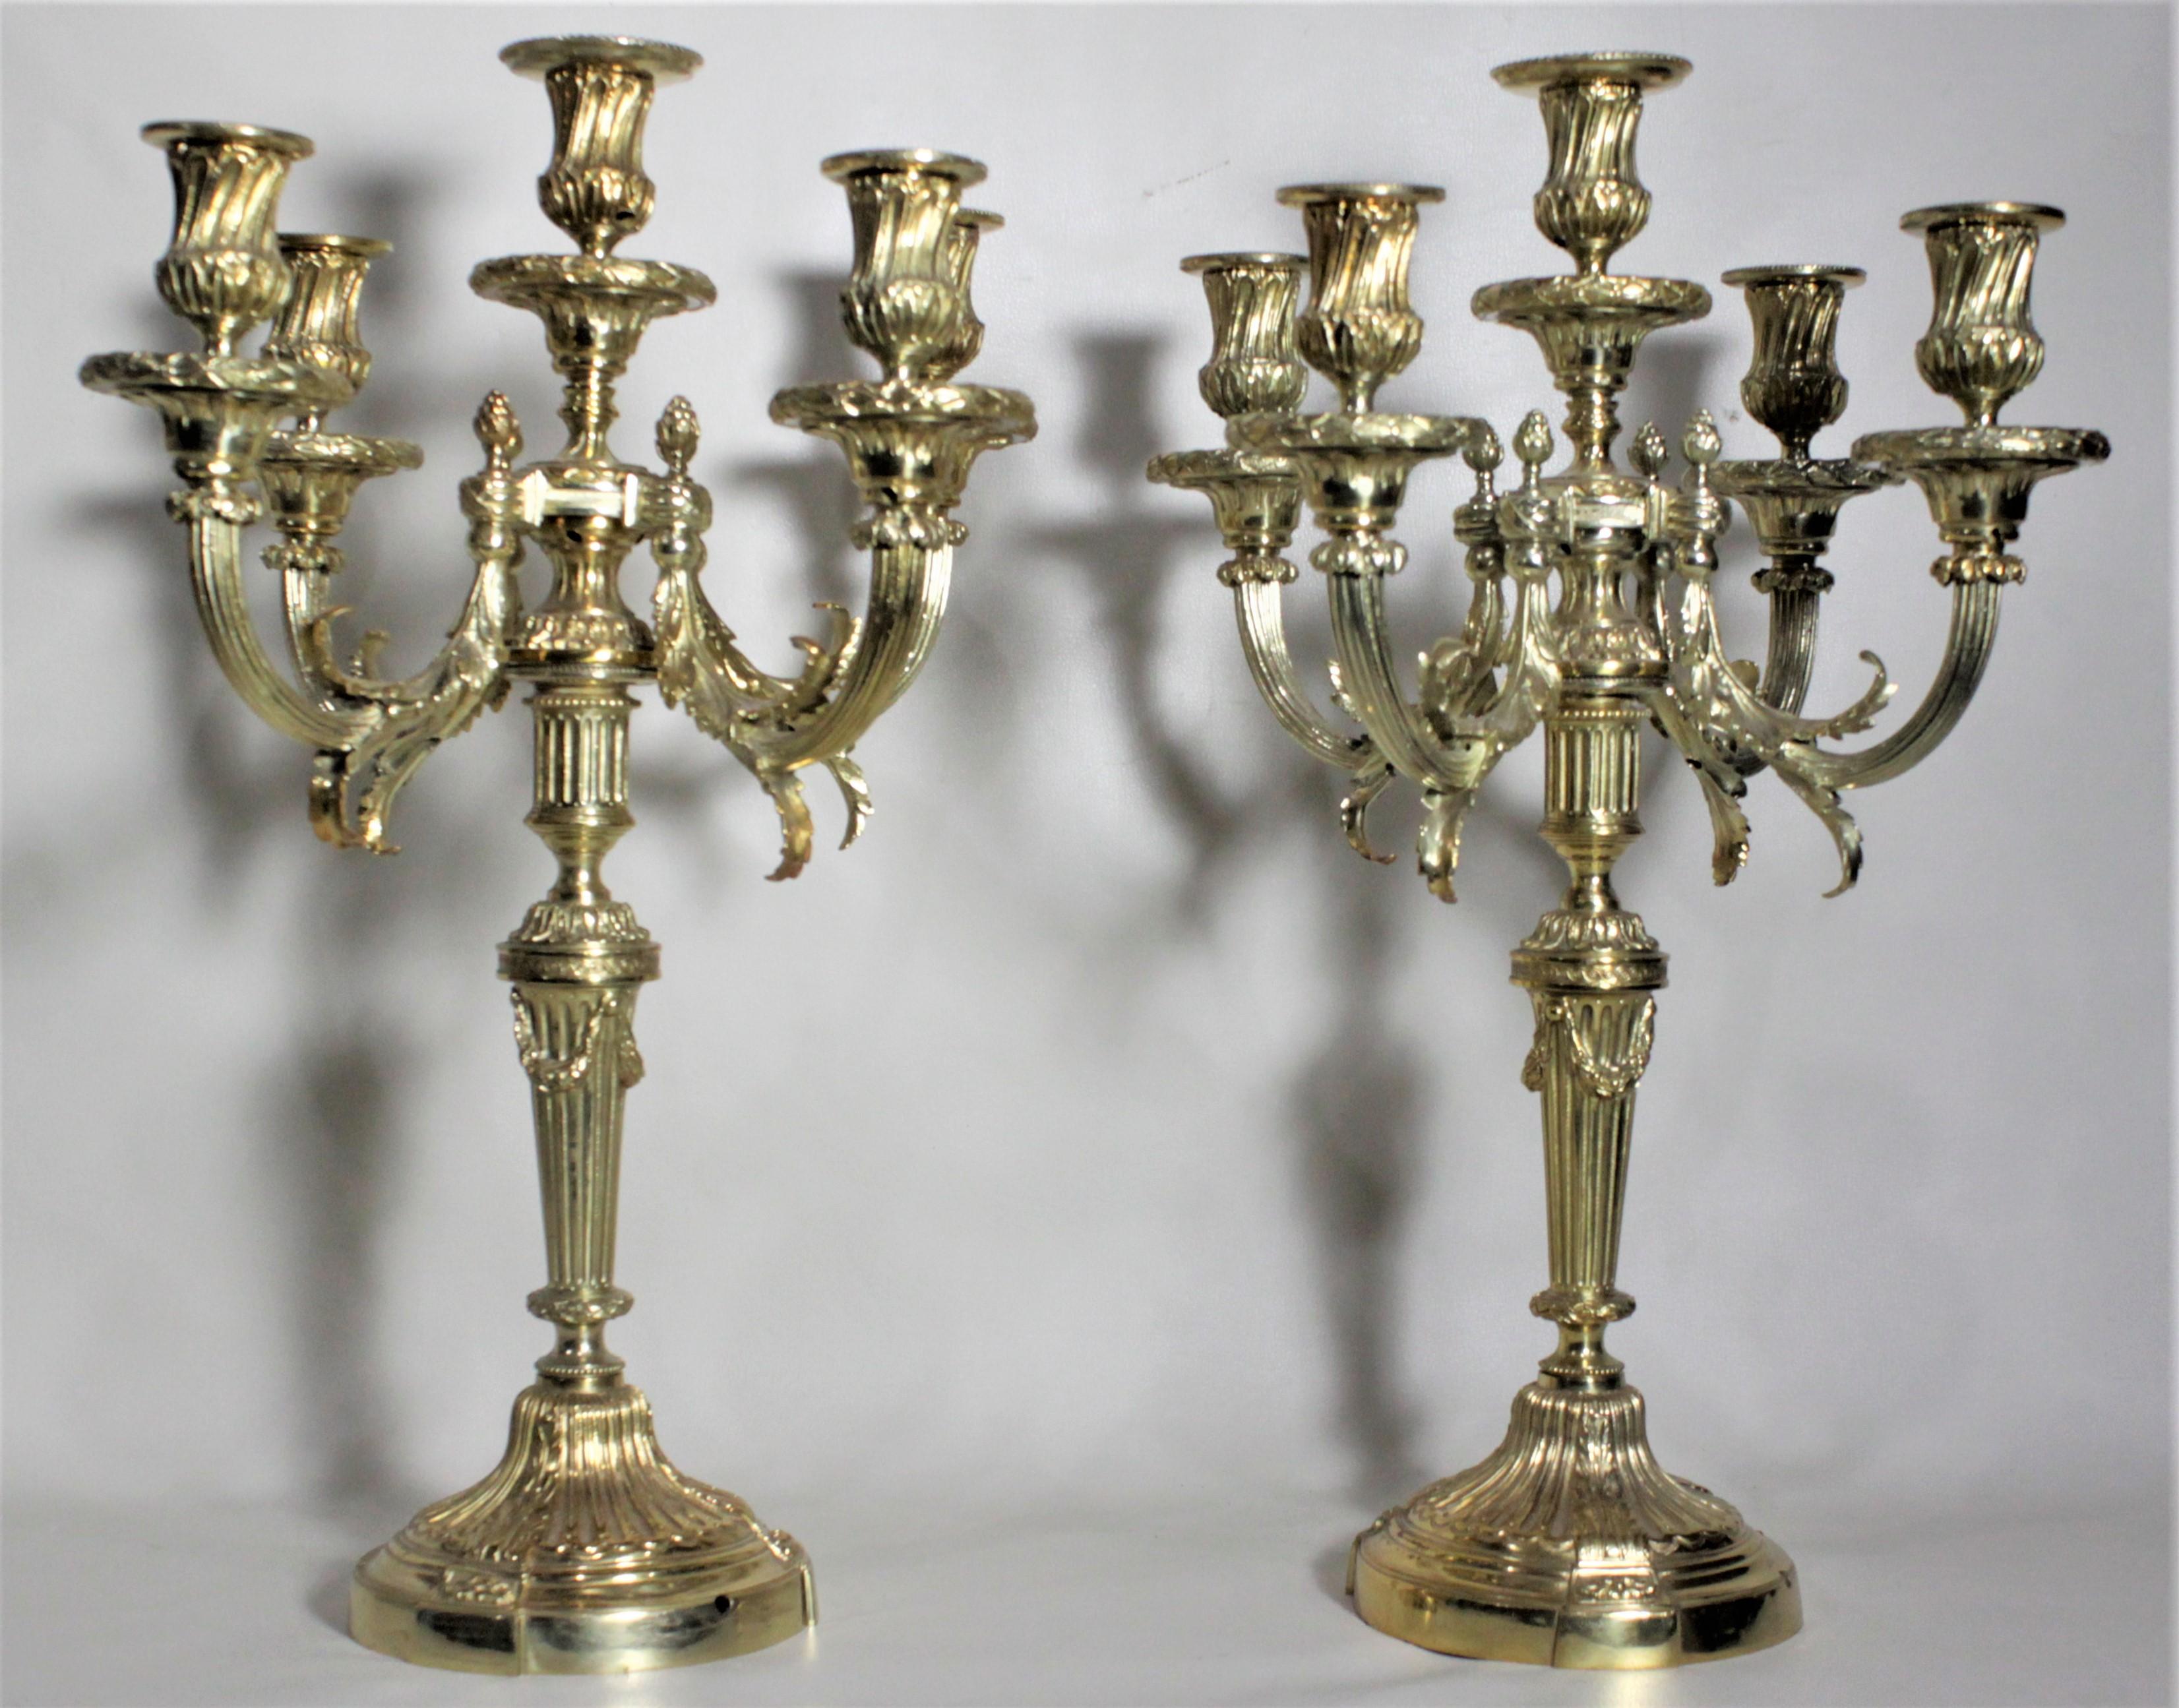 Pair of Antique Empire Style Four Branch Gilt Bronze Candelabras In Good Condition For Sale In Hamilton, Ontario